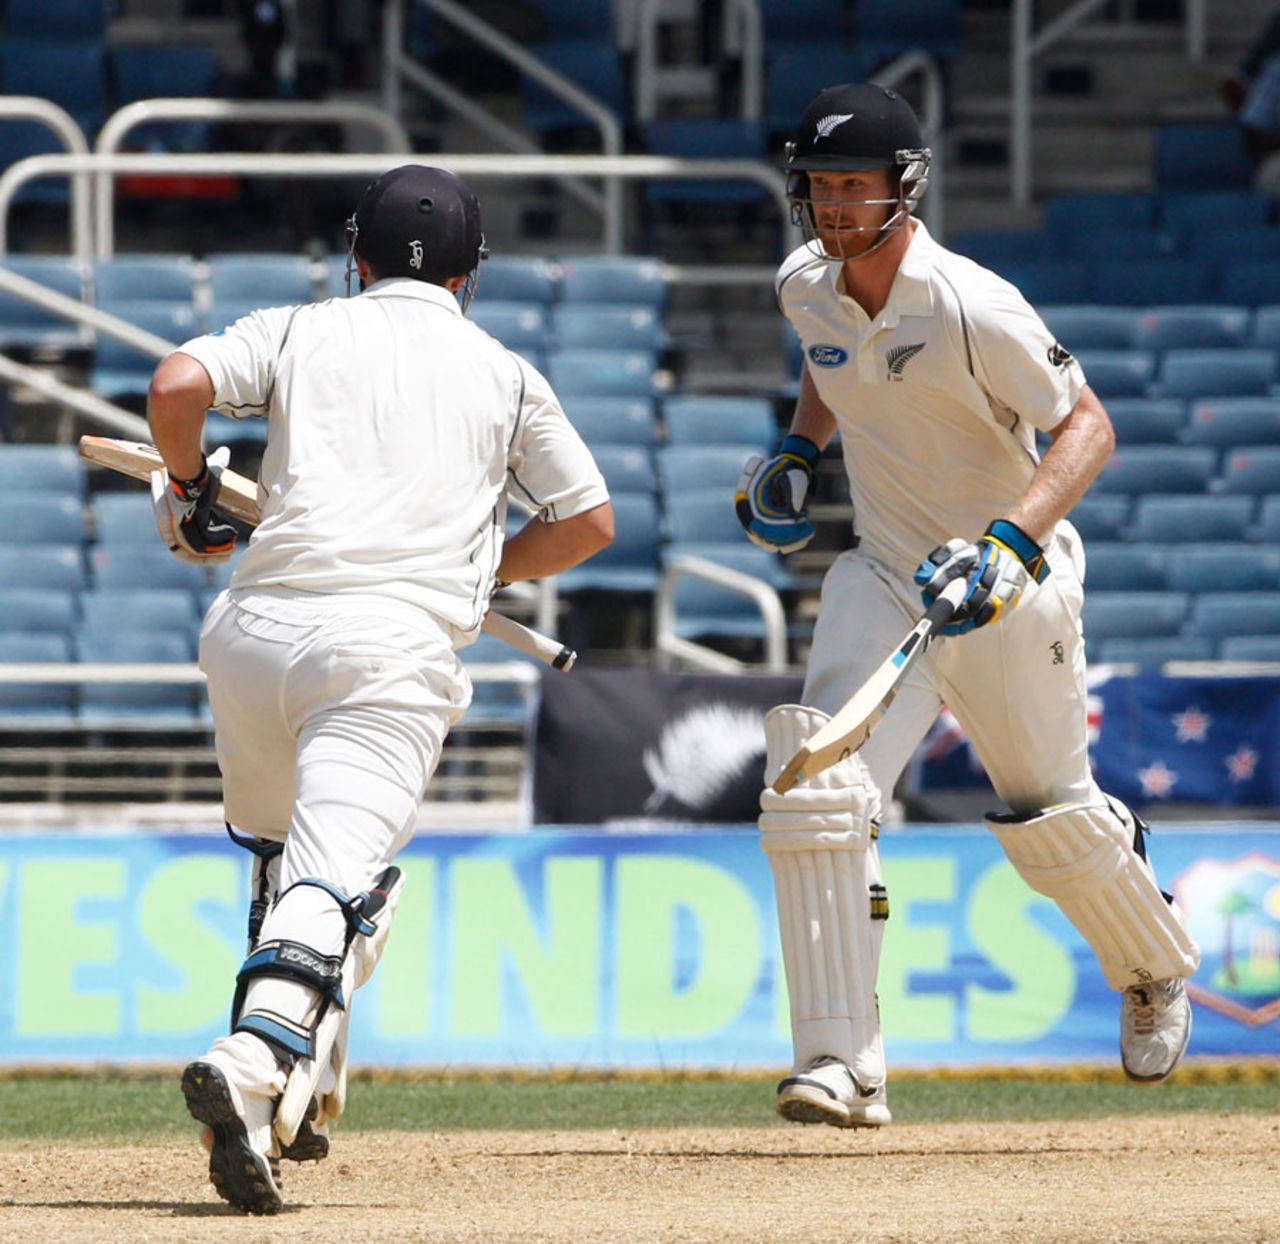 Jimmy Neesham and BJ Watling were cautious but solid, West Indies v New Zealand, 1st Test, Kingston, 2nd day, June 9, 2014